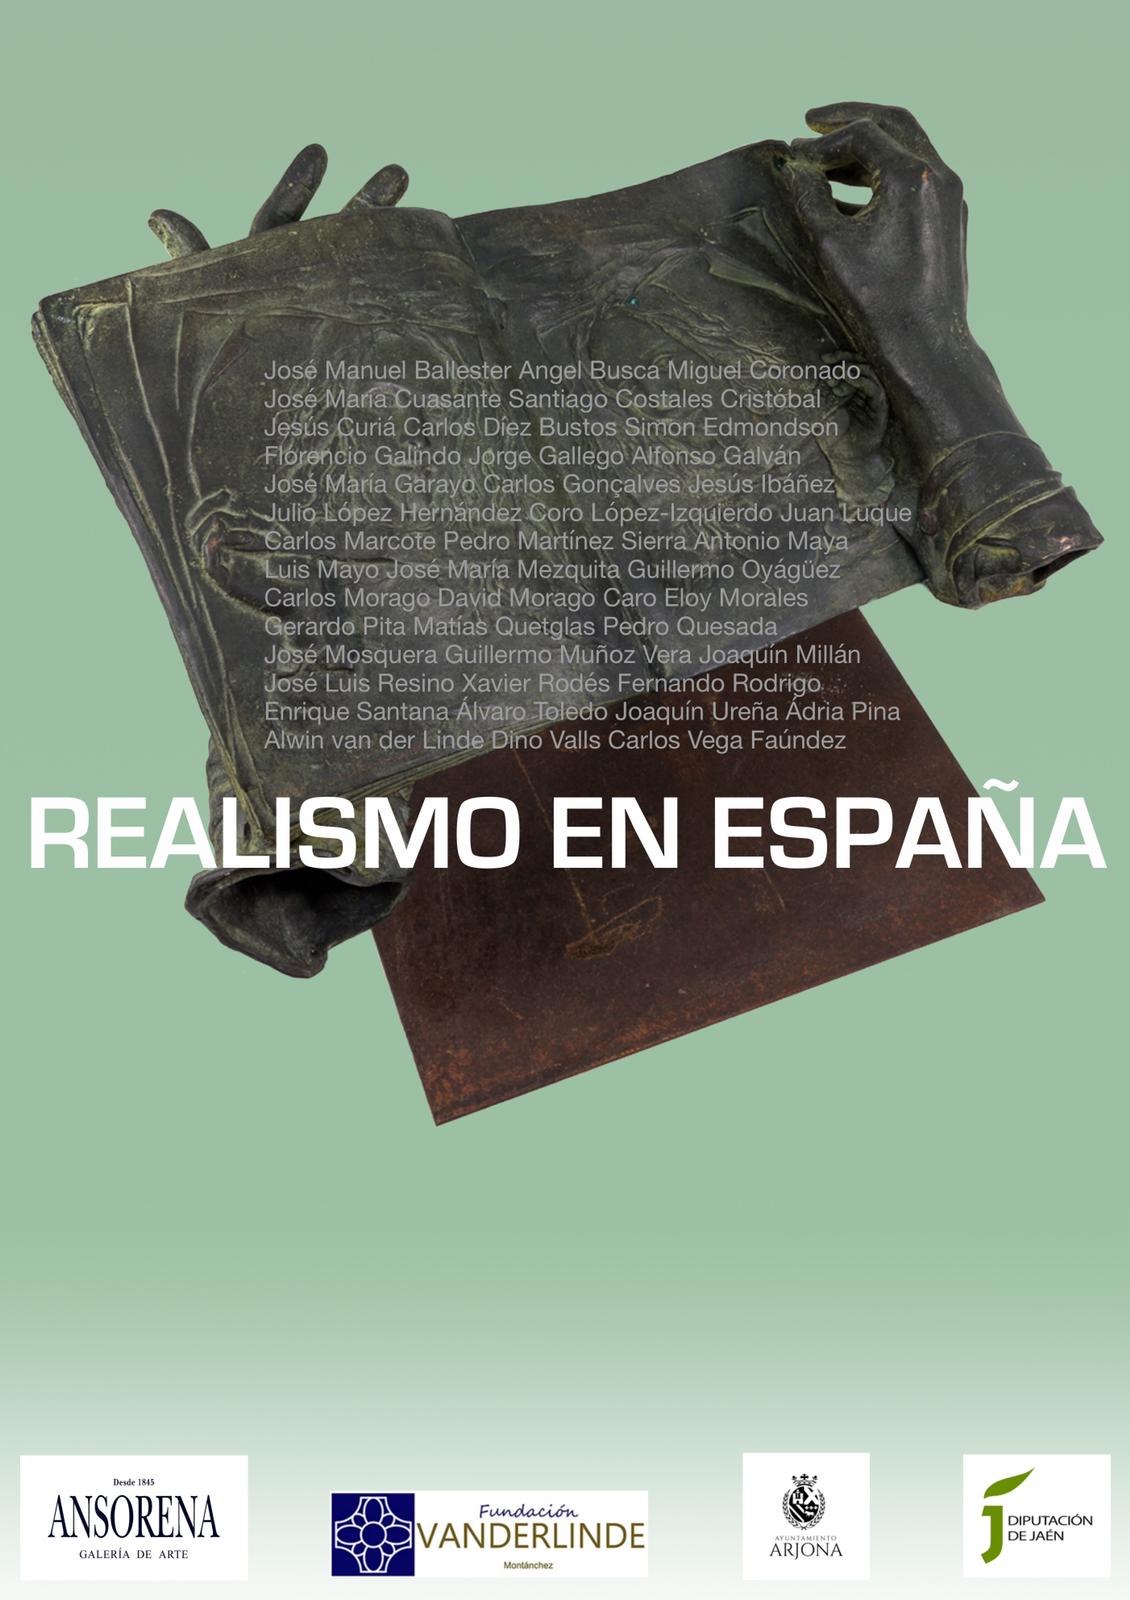 Exhibition Realism in Spain - Mato Ansorena Collection